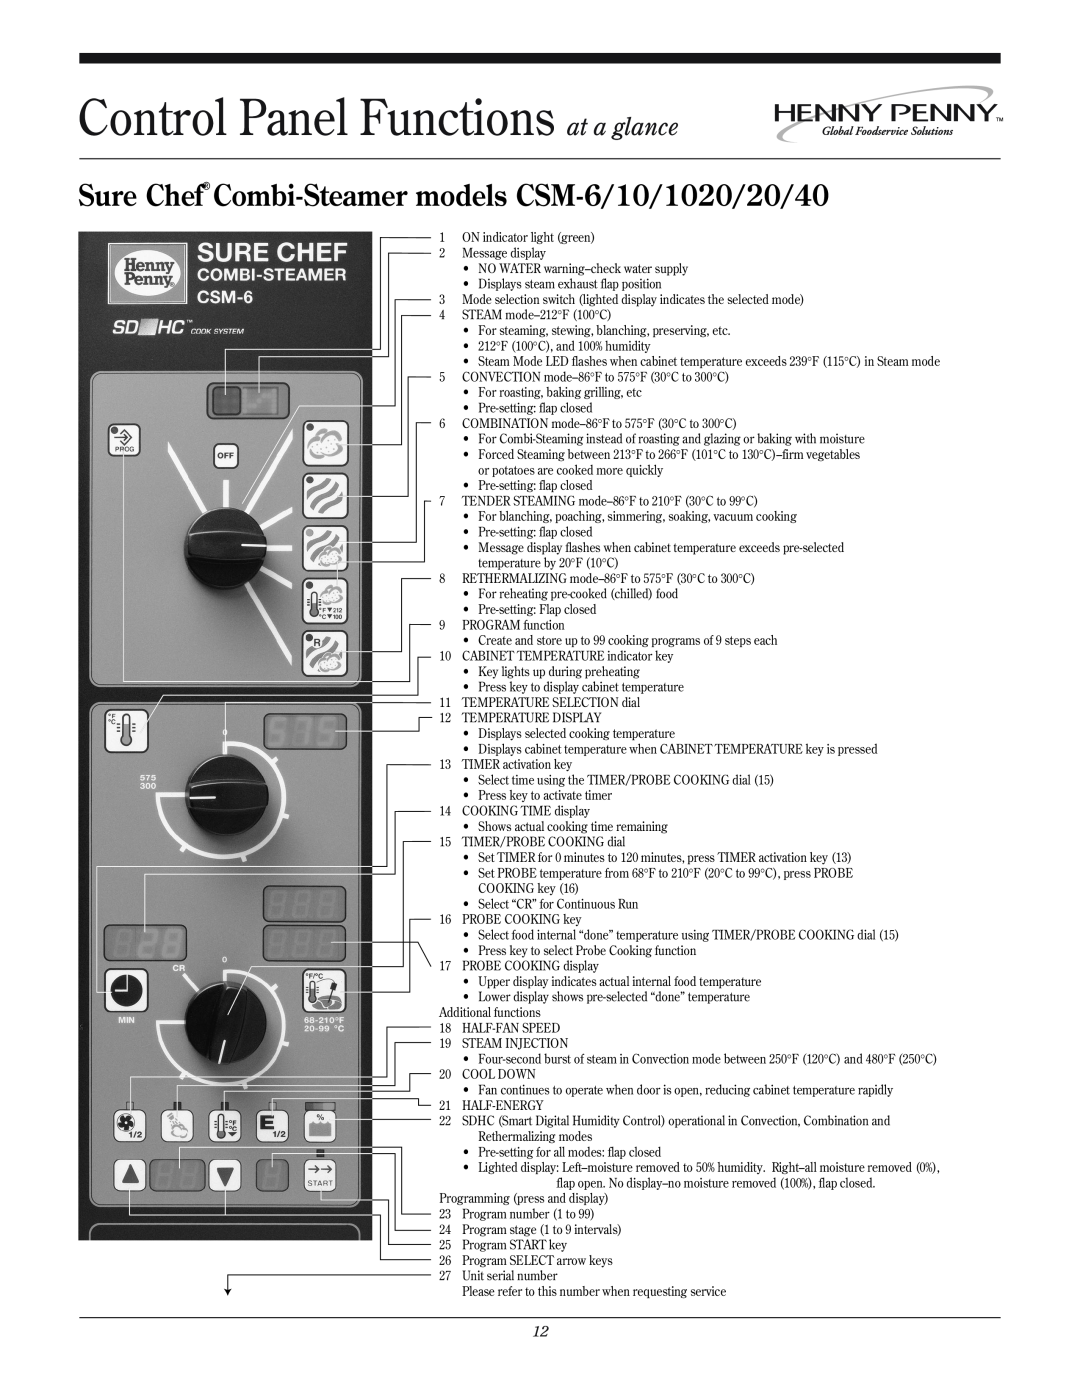 Henny Penny CSG manual Sure Chef Combi-Steamer models CSM-6/10/1020/20/40, Control Panel Functions at a glance 